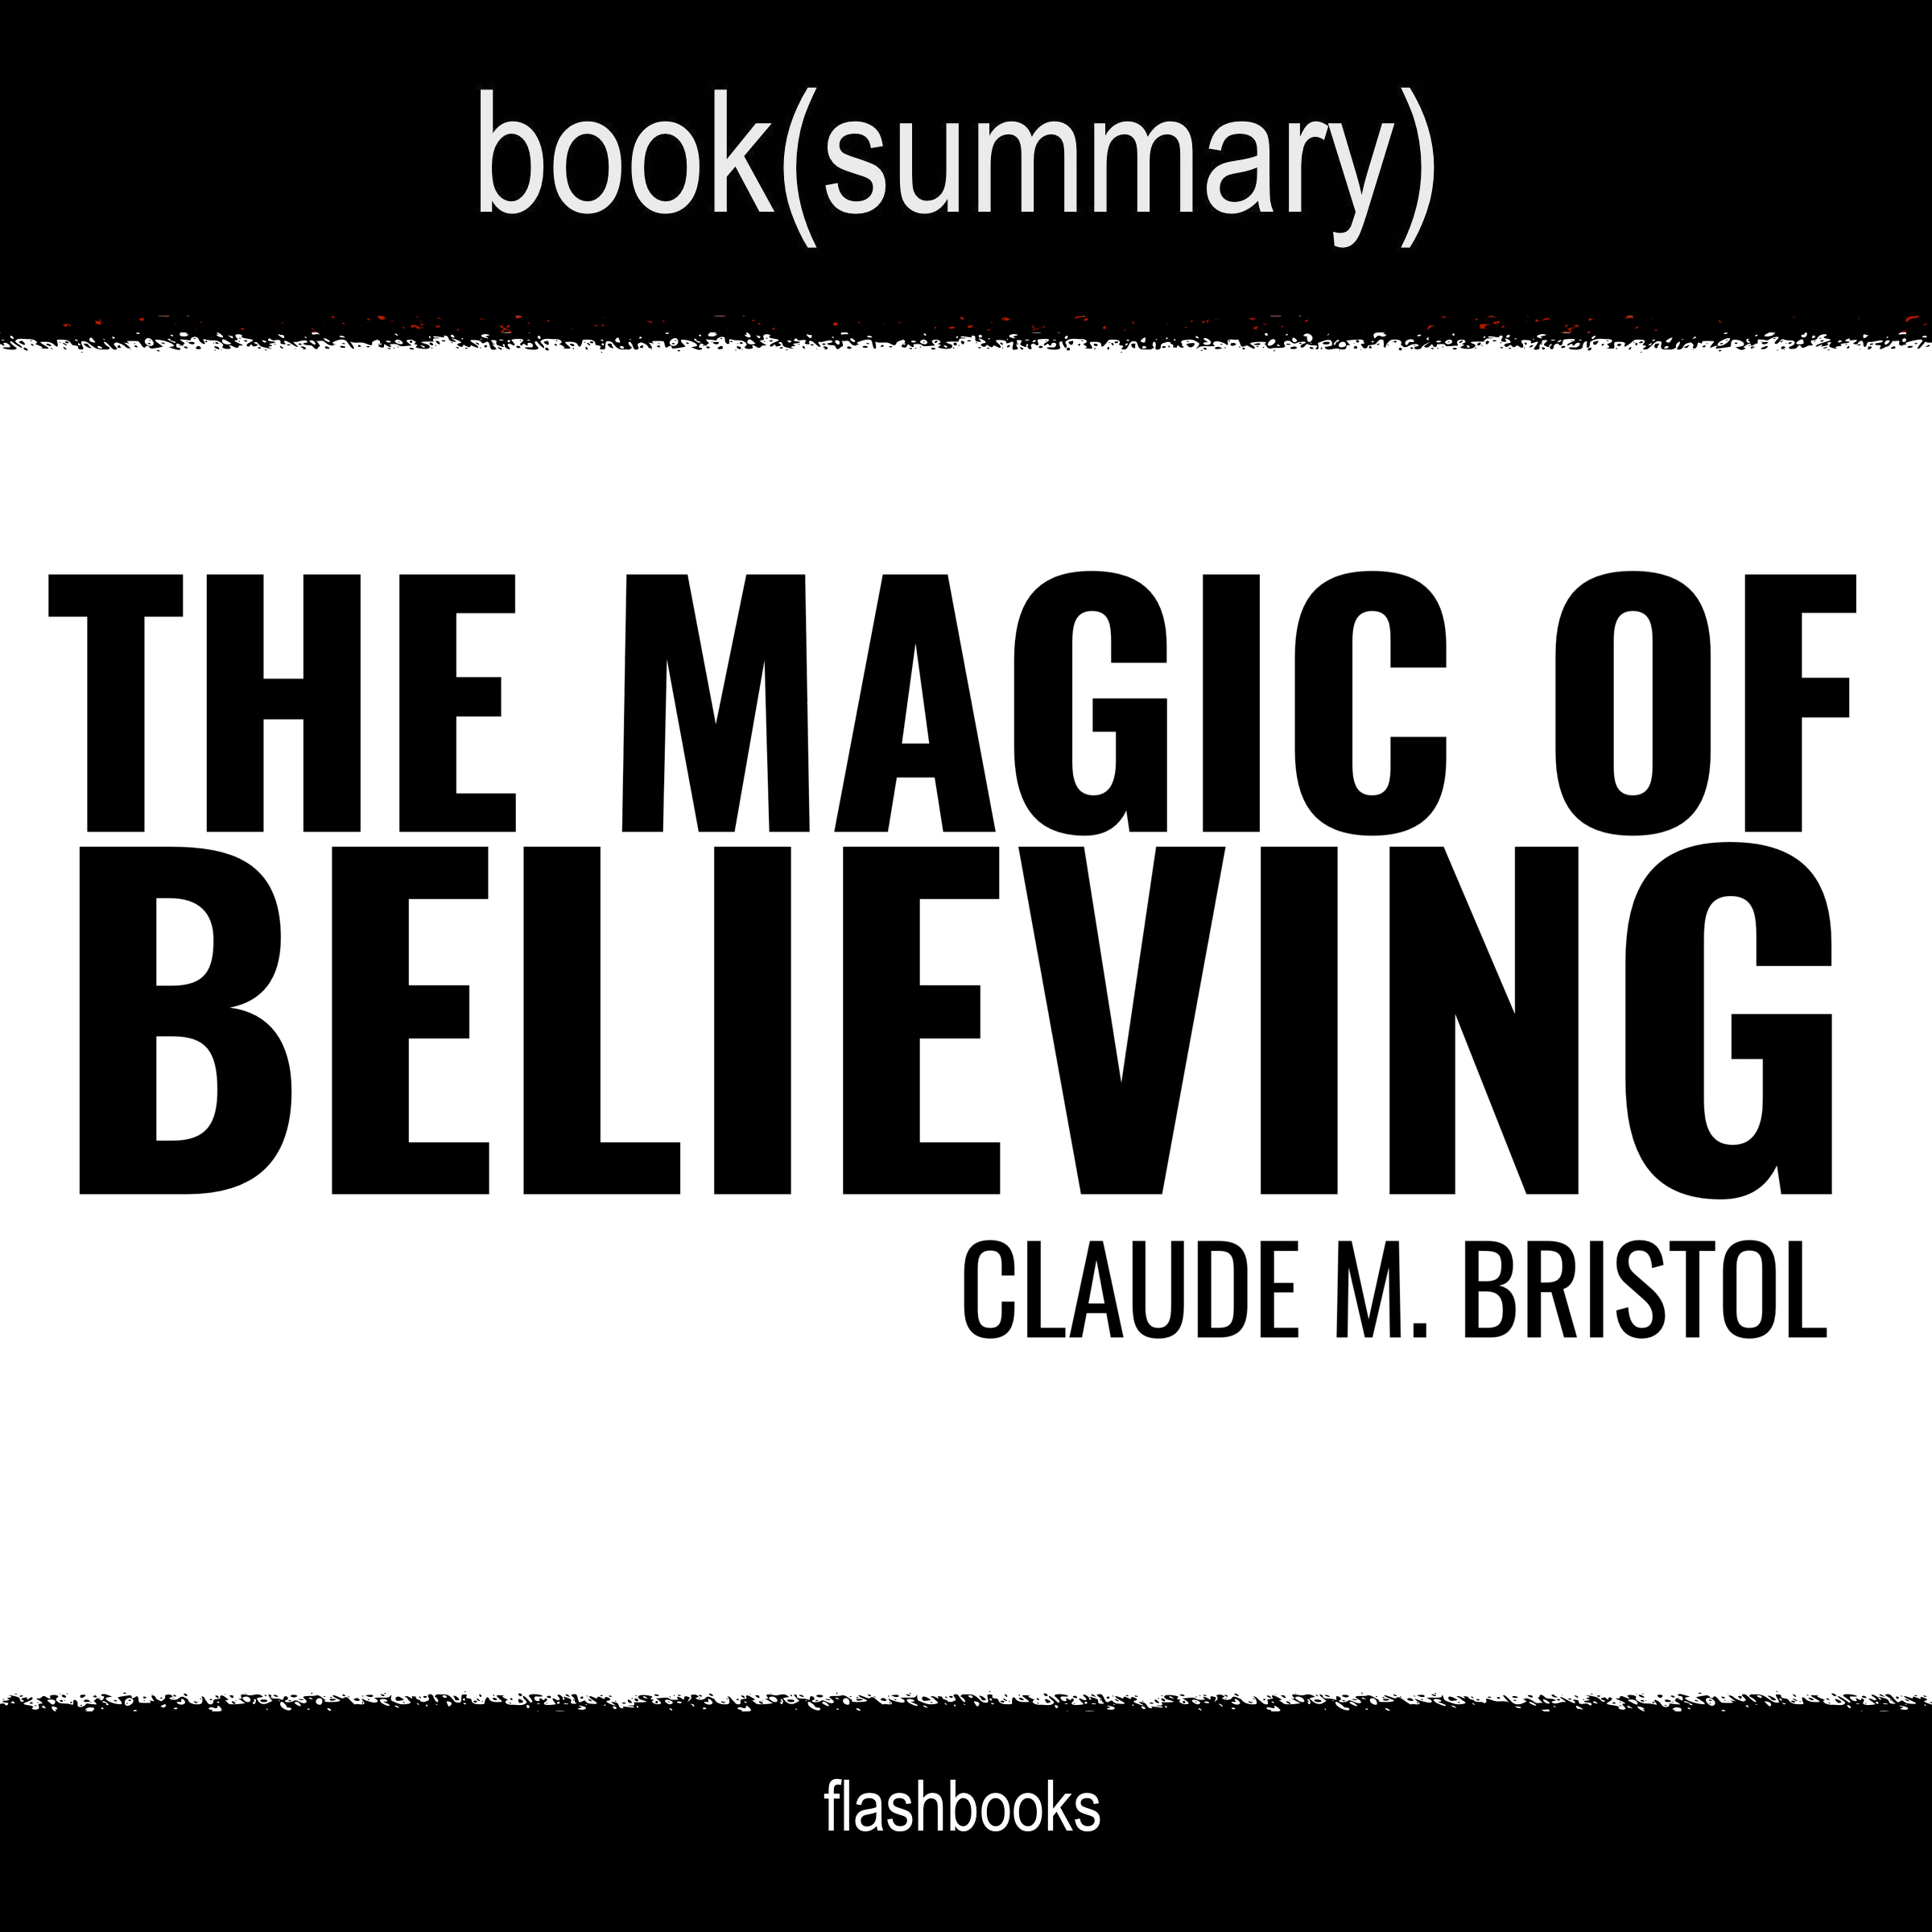 The_Magic_Of_Believing_by_Claude_M_Bristol_Audiobook_Summary